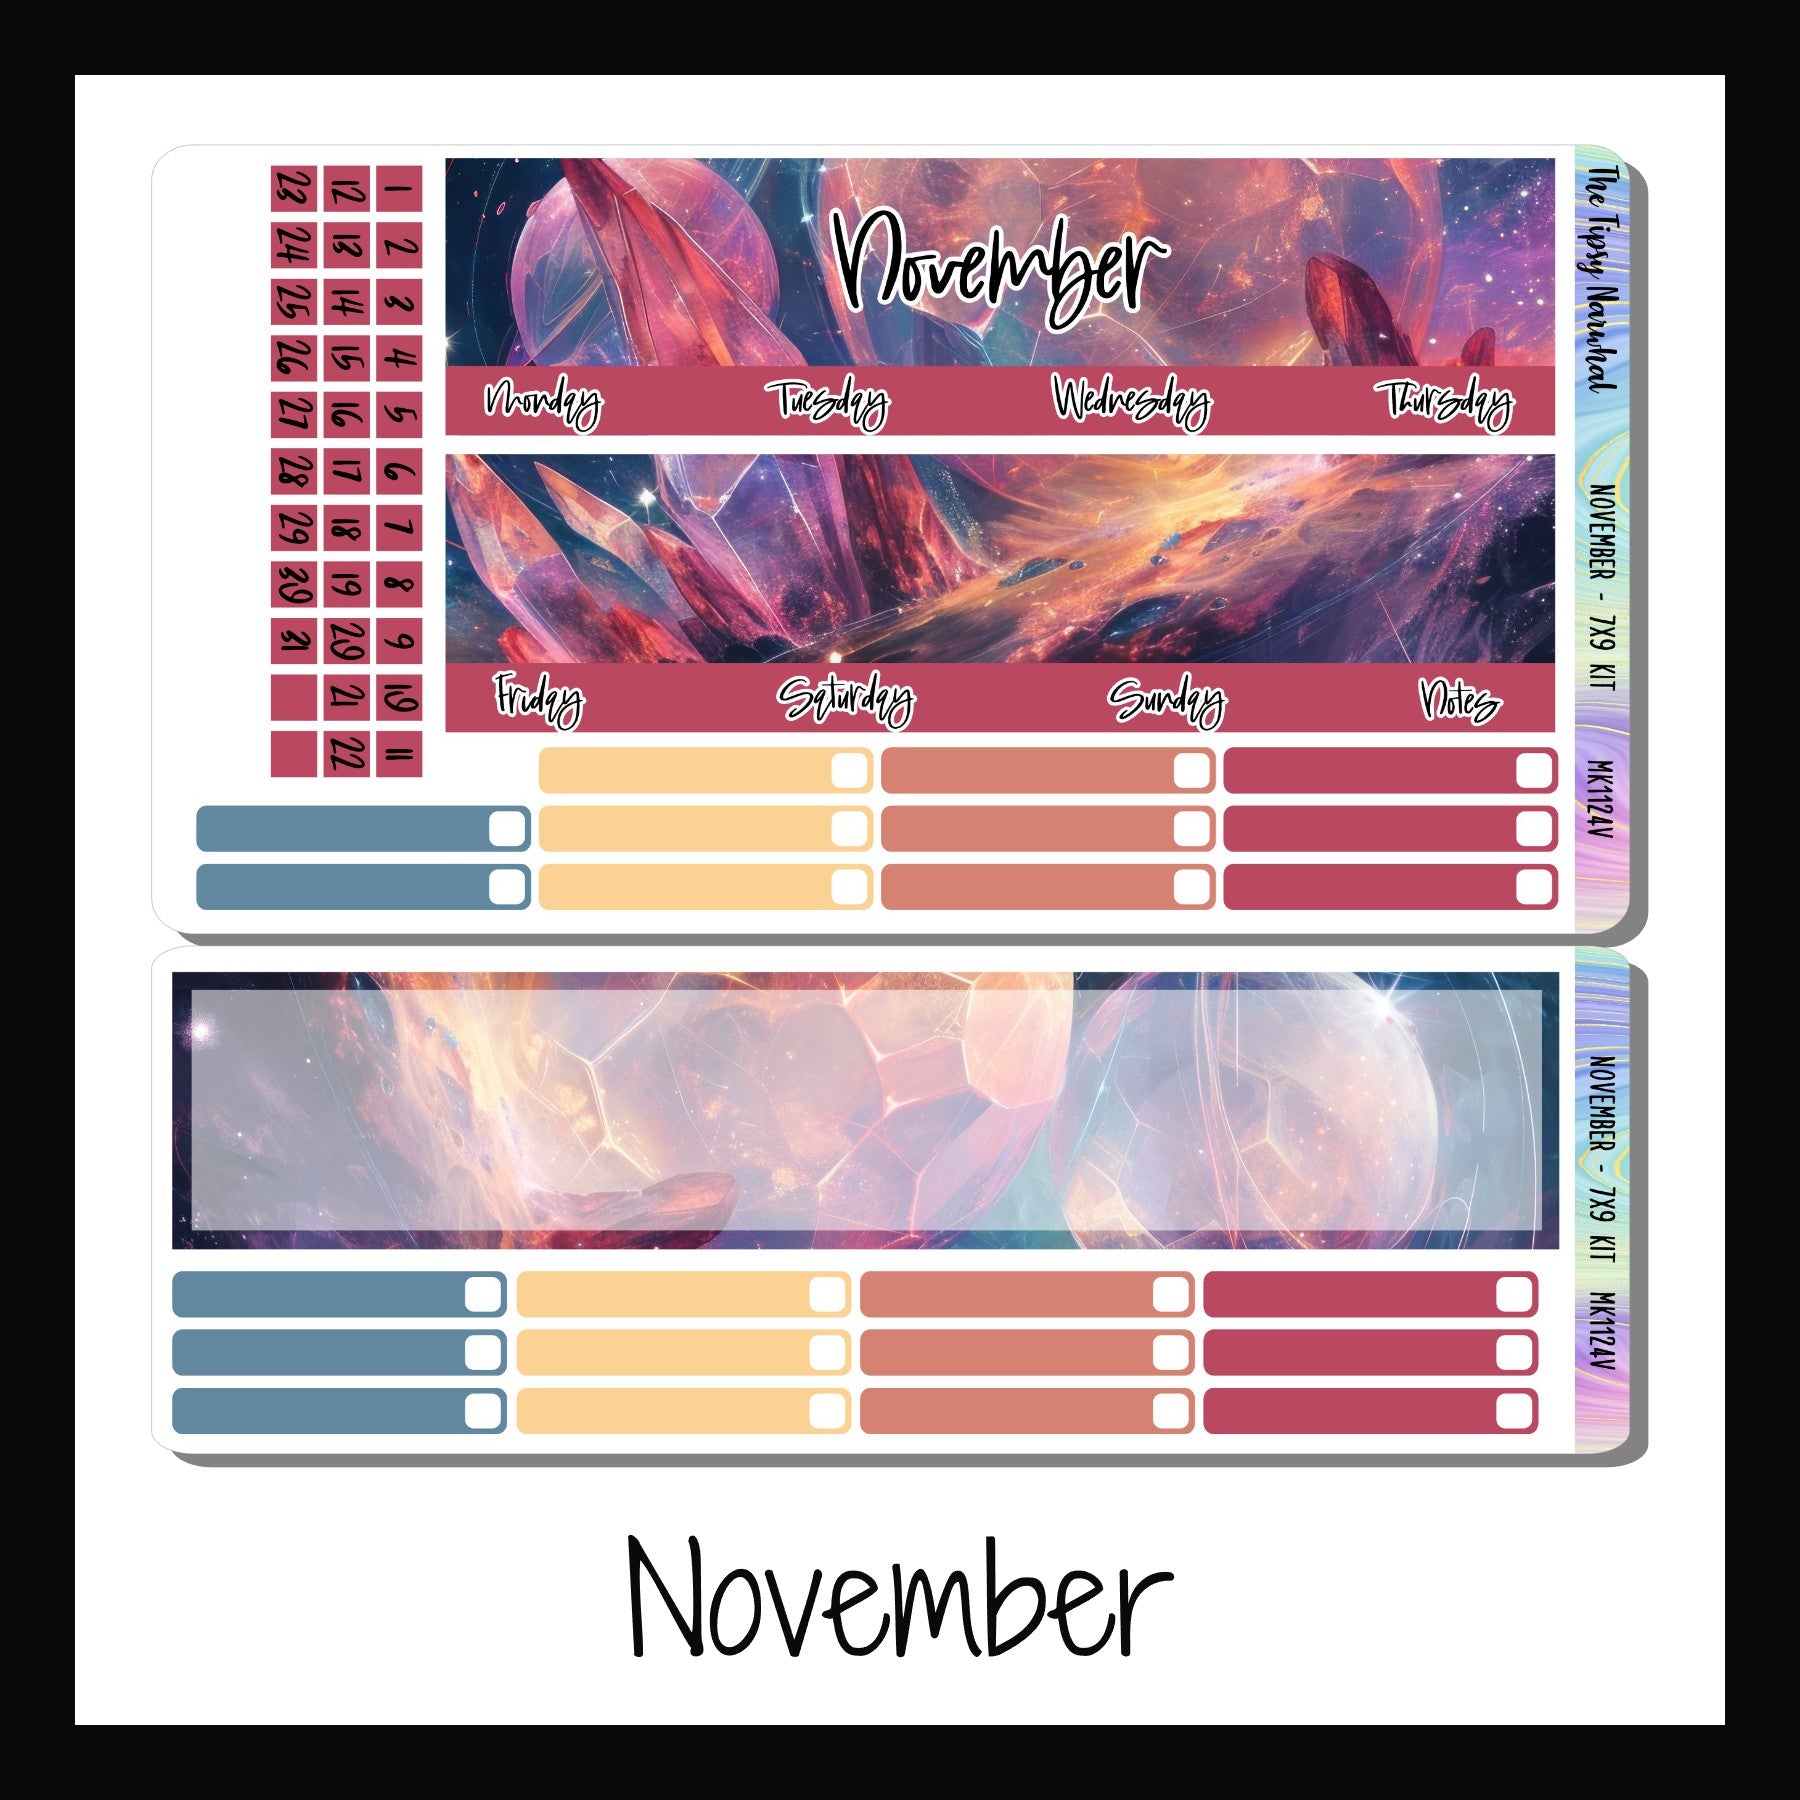 November monthly sticker kit for 7x9 vertical planners.  Novembers design features a bright fiery planet with crystal clusters.  Colors used are vivid shades of red, oranges, yellows with subtle highlights of blue and purple.